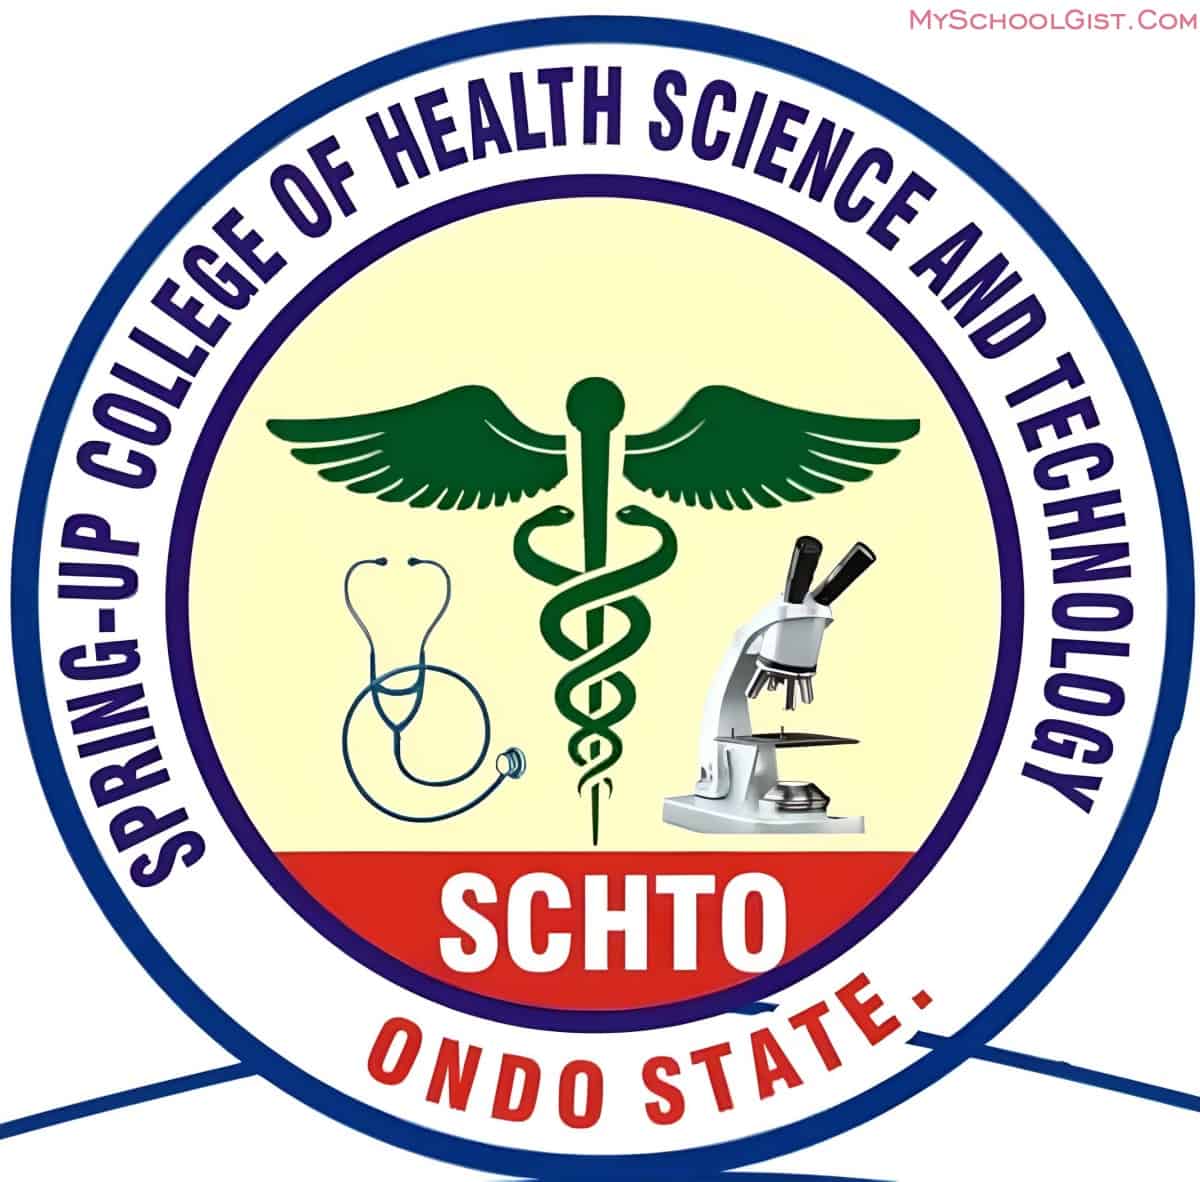 Spring Up College Of Health Science And Technology Ondo State (SCHTO) School Fees Schedule